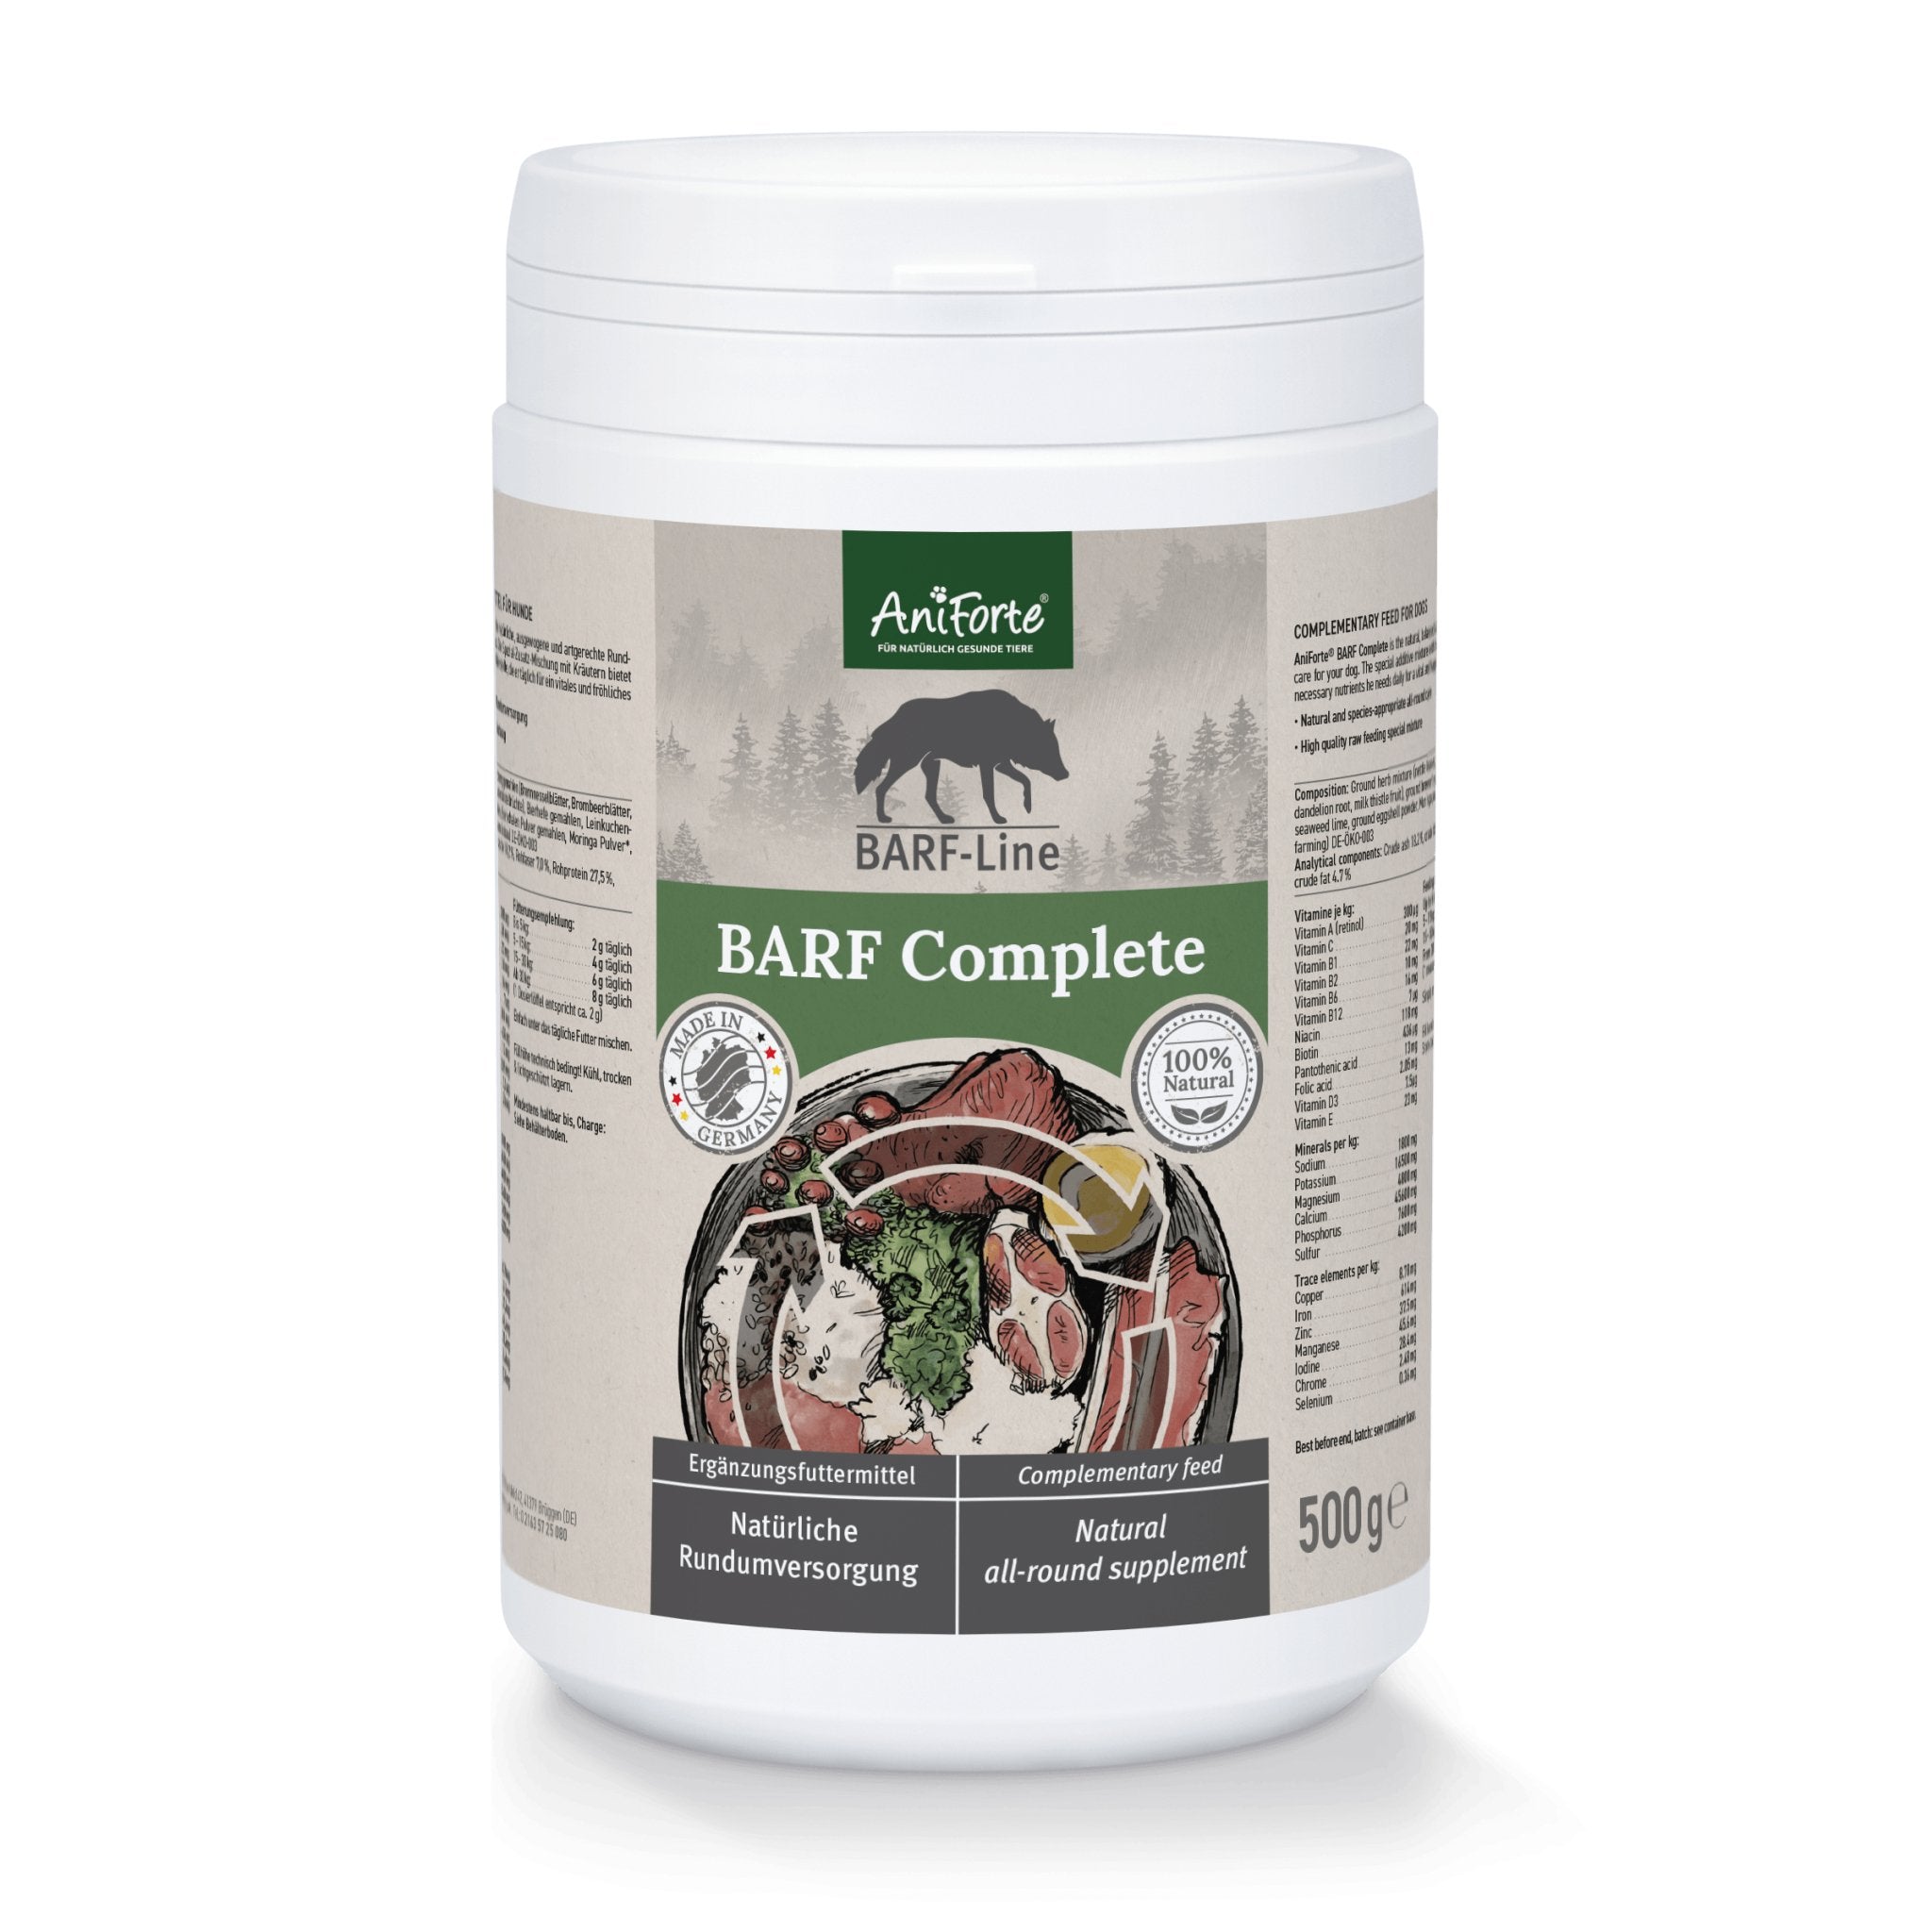 Raw Feeding Bestsellers - Barf Complete with Salmon Oil - AniForte UK